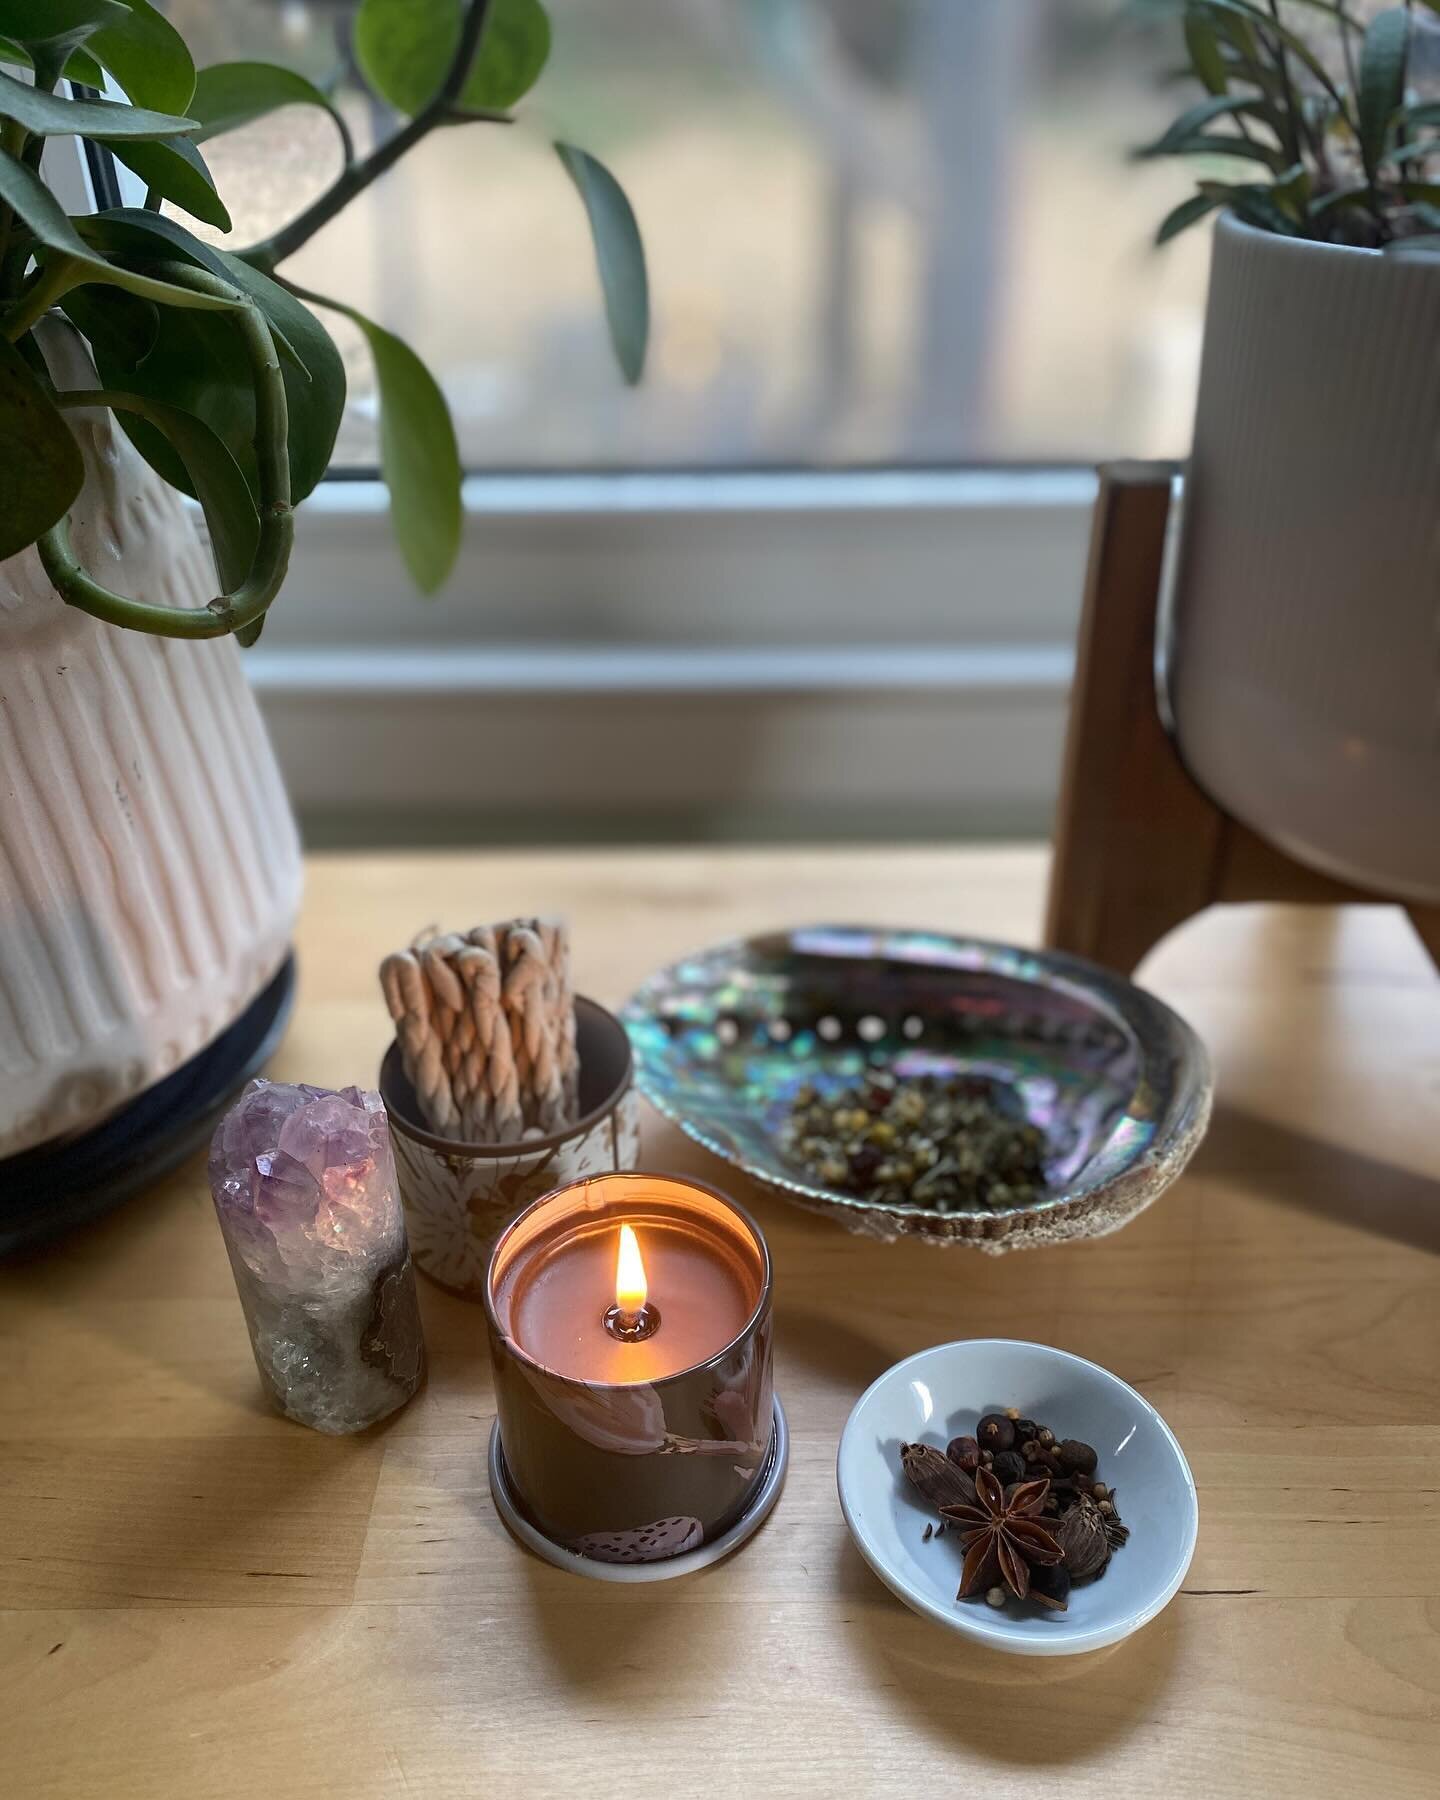 Happy Groundhog Day! 

To decorate my altar for Imbolc, I used coriander, caraway seed, cardamom, allspice, juniper, berries, clove, and star anise,&mdash; these also happen to be some of the ingredients for Krupnikas 🥃 

I have a seashell from my a